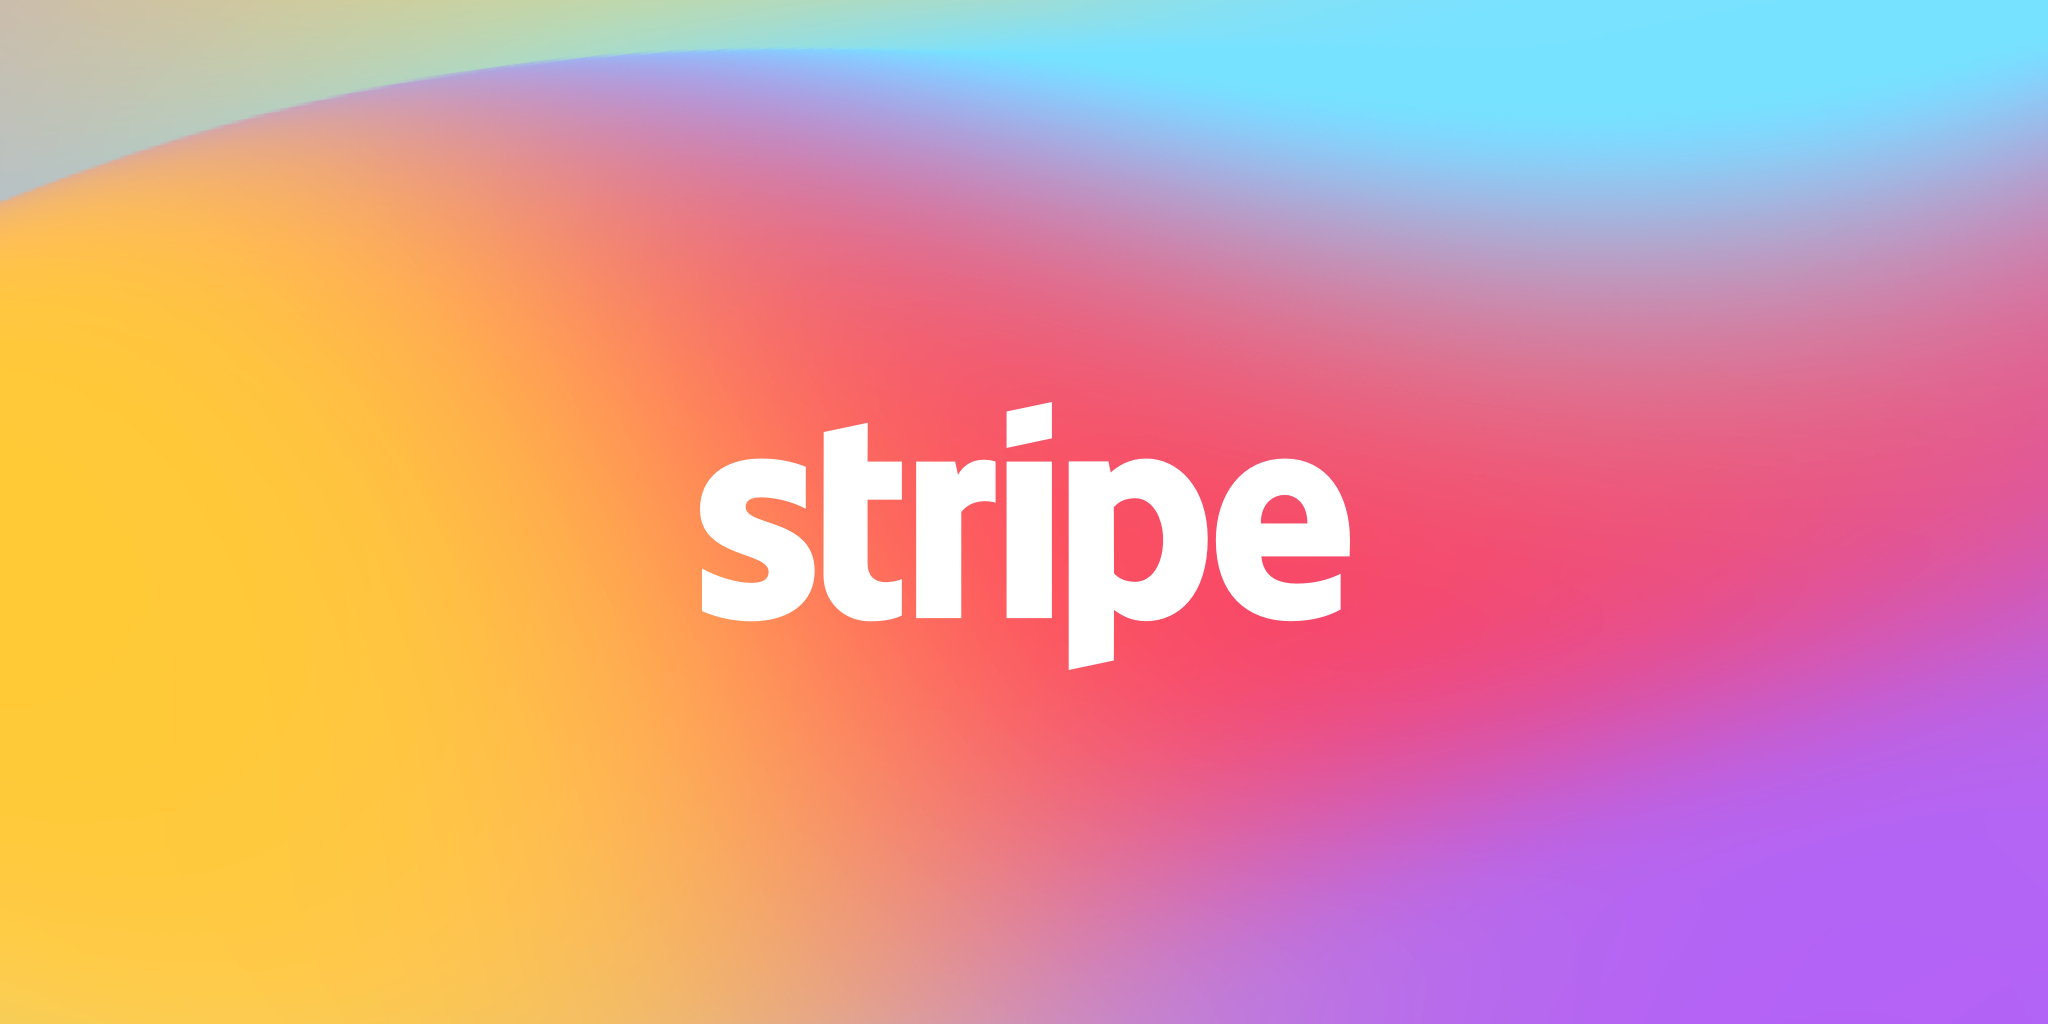 How Does Stripe Work?